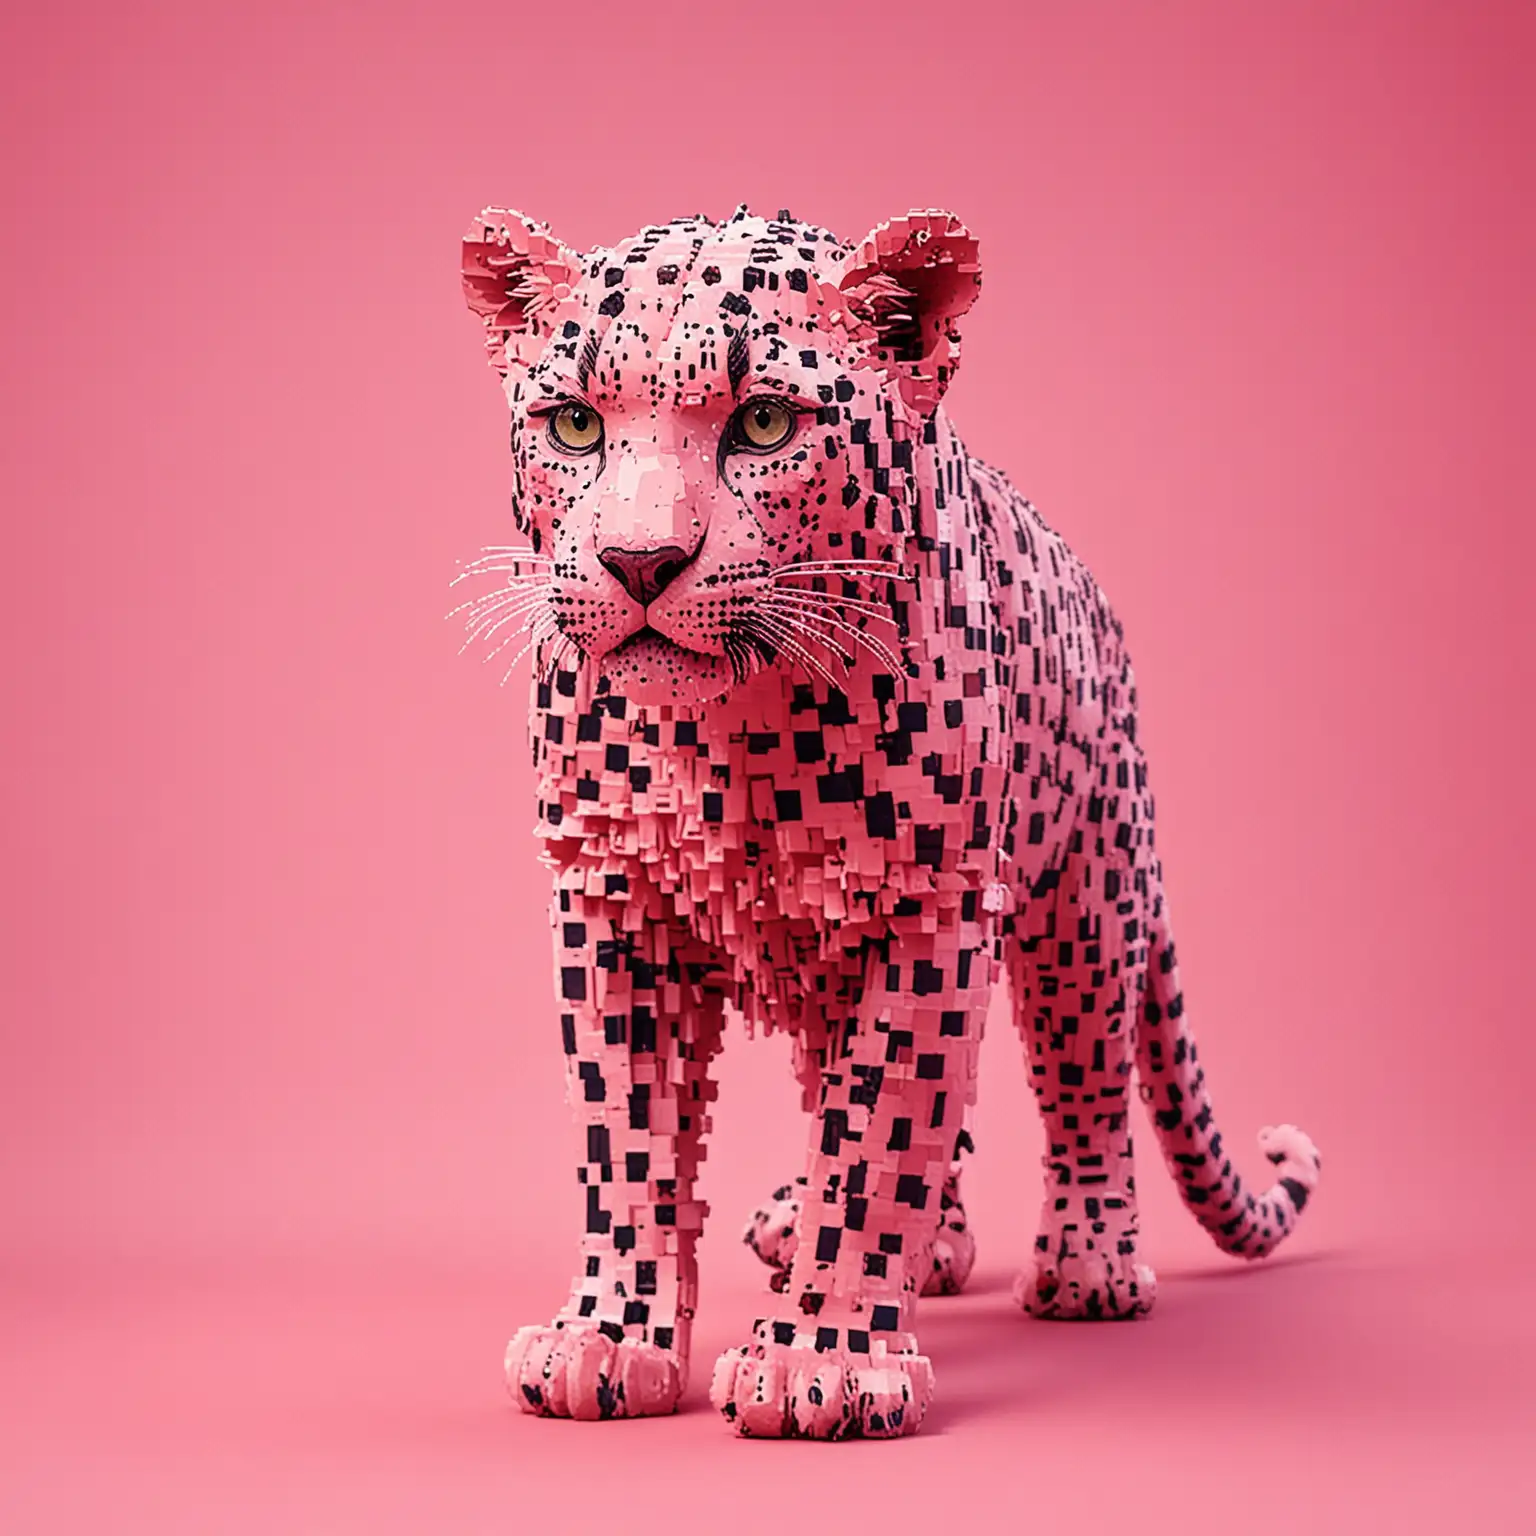 Pink Leopard Pixelated Abstract Animal Art on Vibrant Pink Background